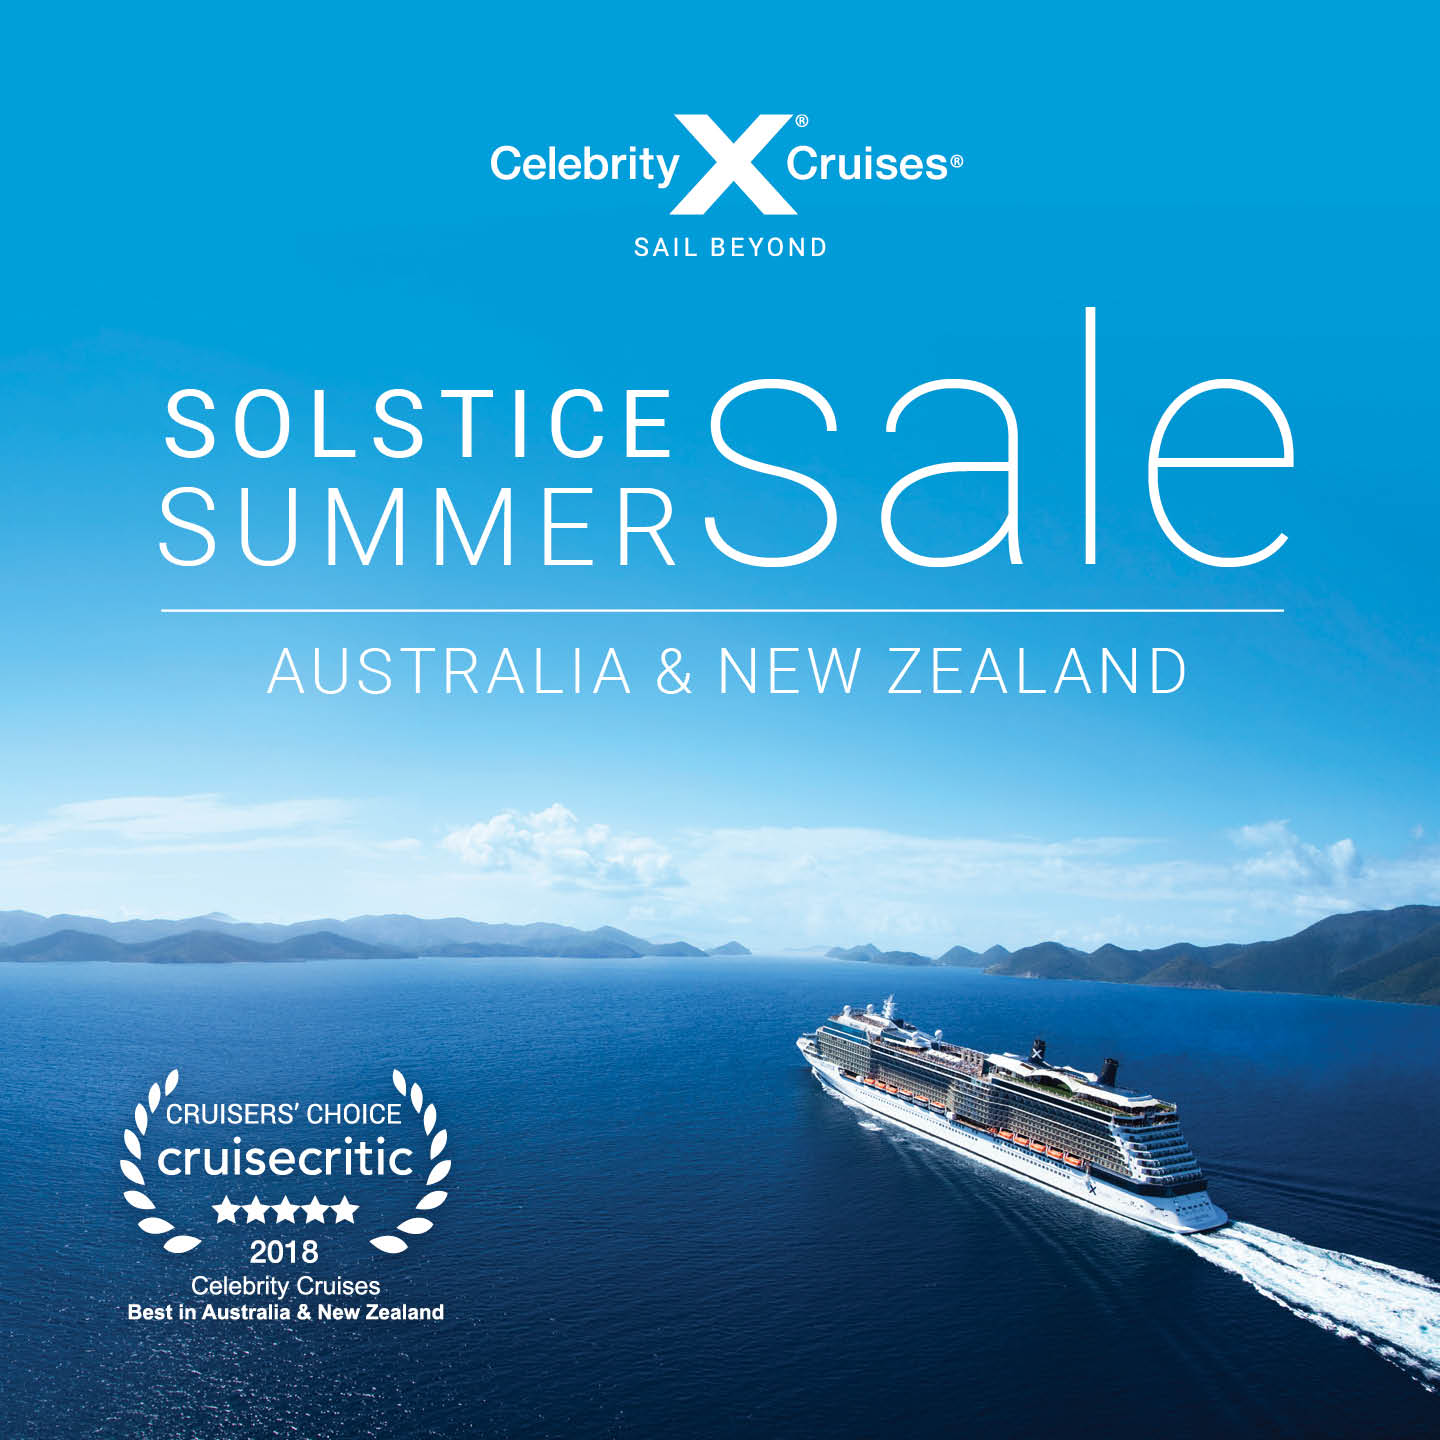 Last Minute Cruises on Celebrity Solstice Australia Cruise Offers Cruise Offers